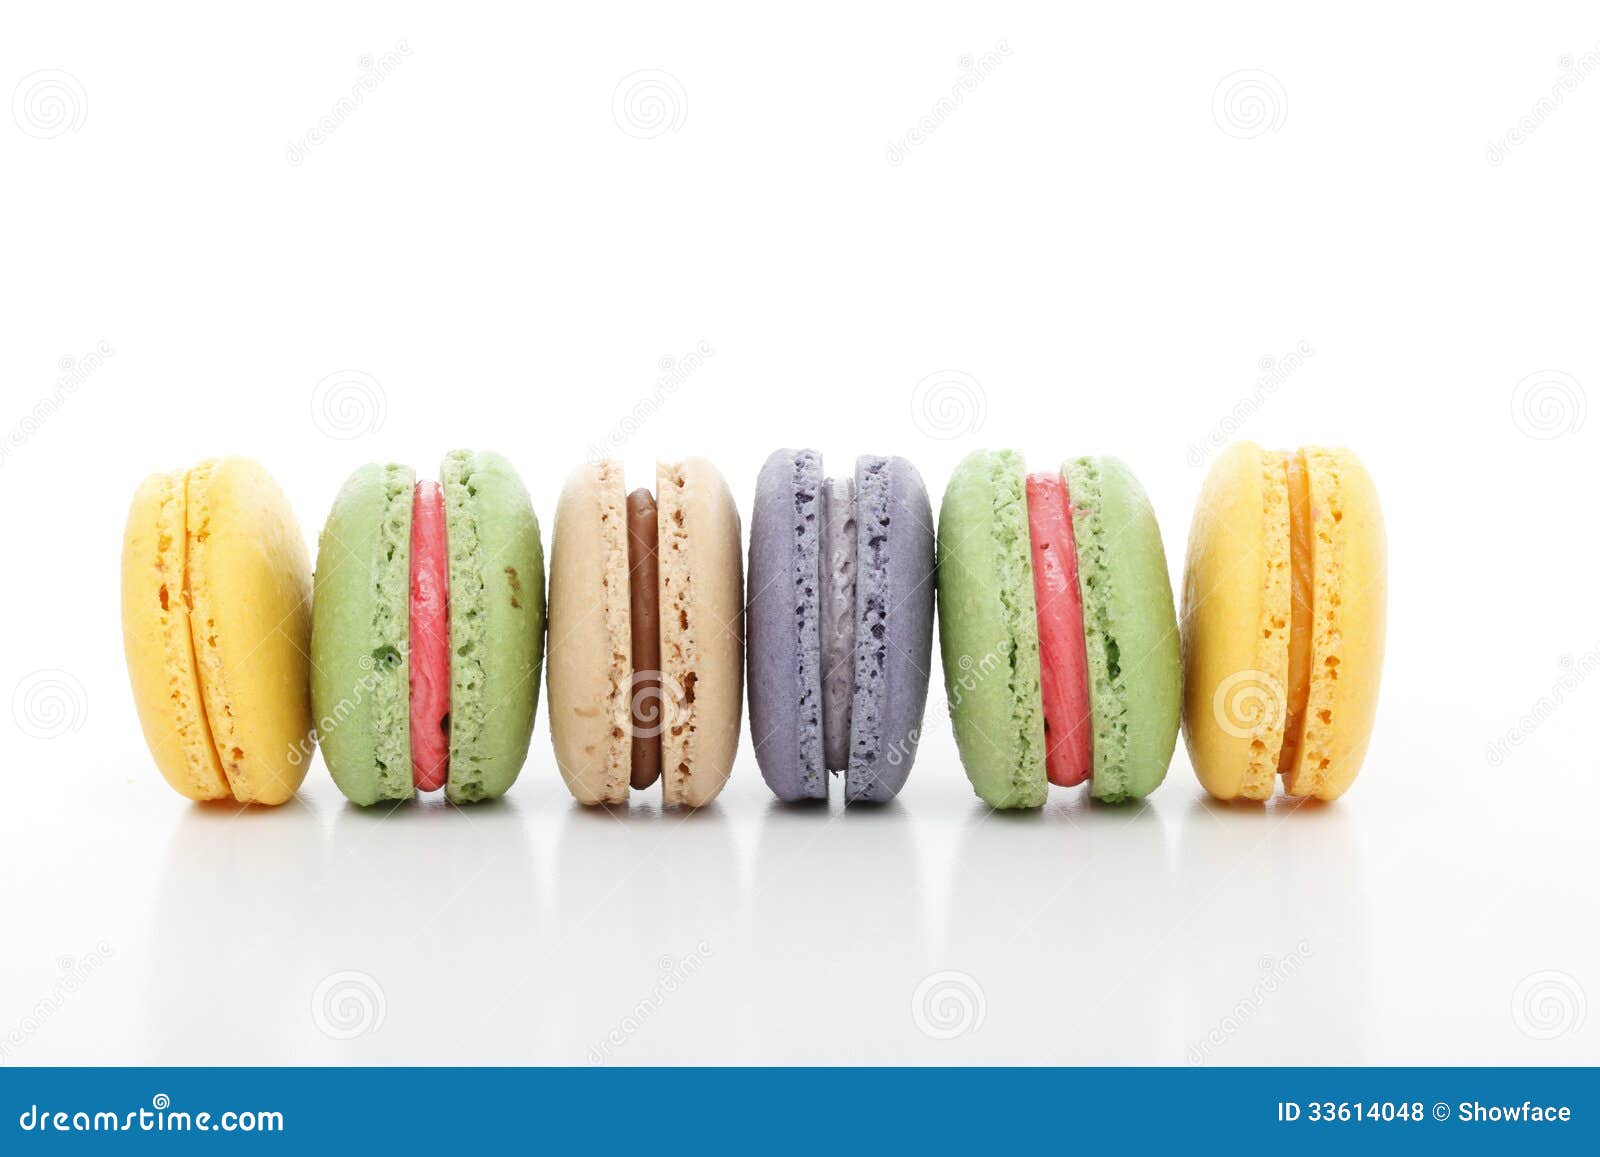 Assorted Baked Macarons Macaroons In A Row Stock Photo - Image of ...